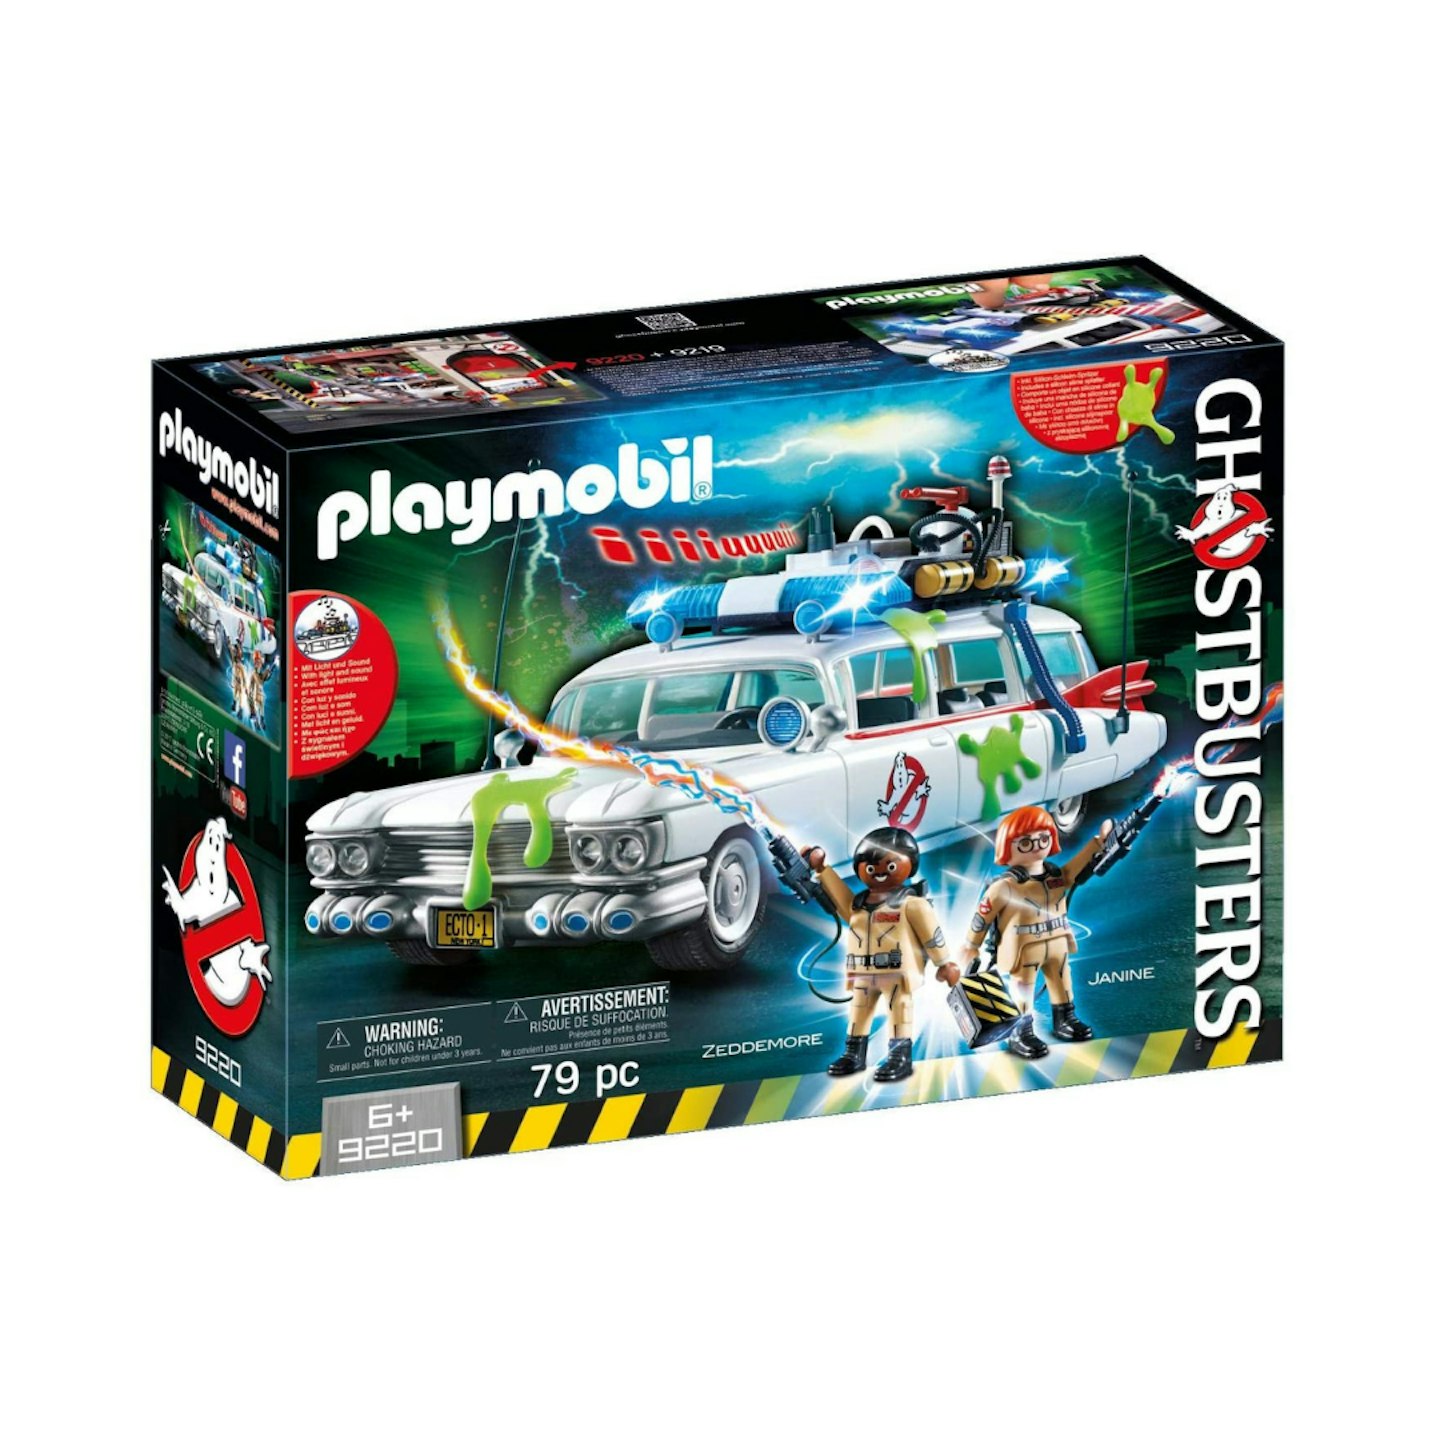 Playmobil Ghostbusters 9220 Ecto-1 with Light and Sound Effects